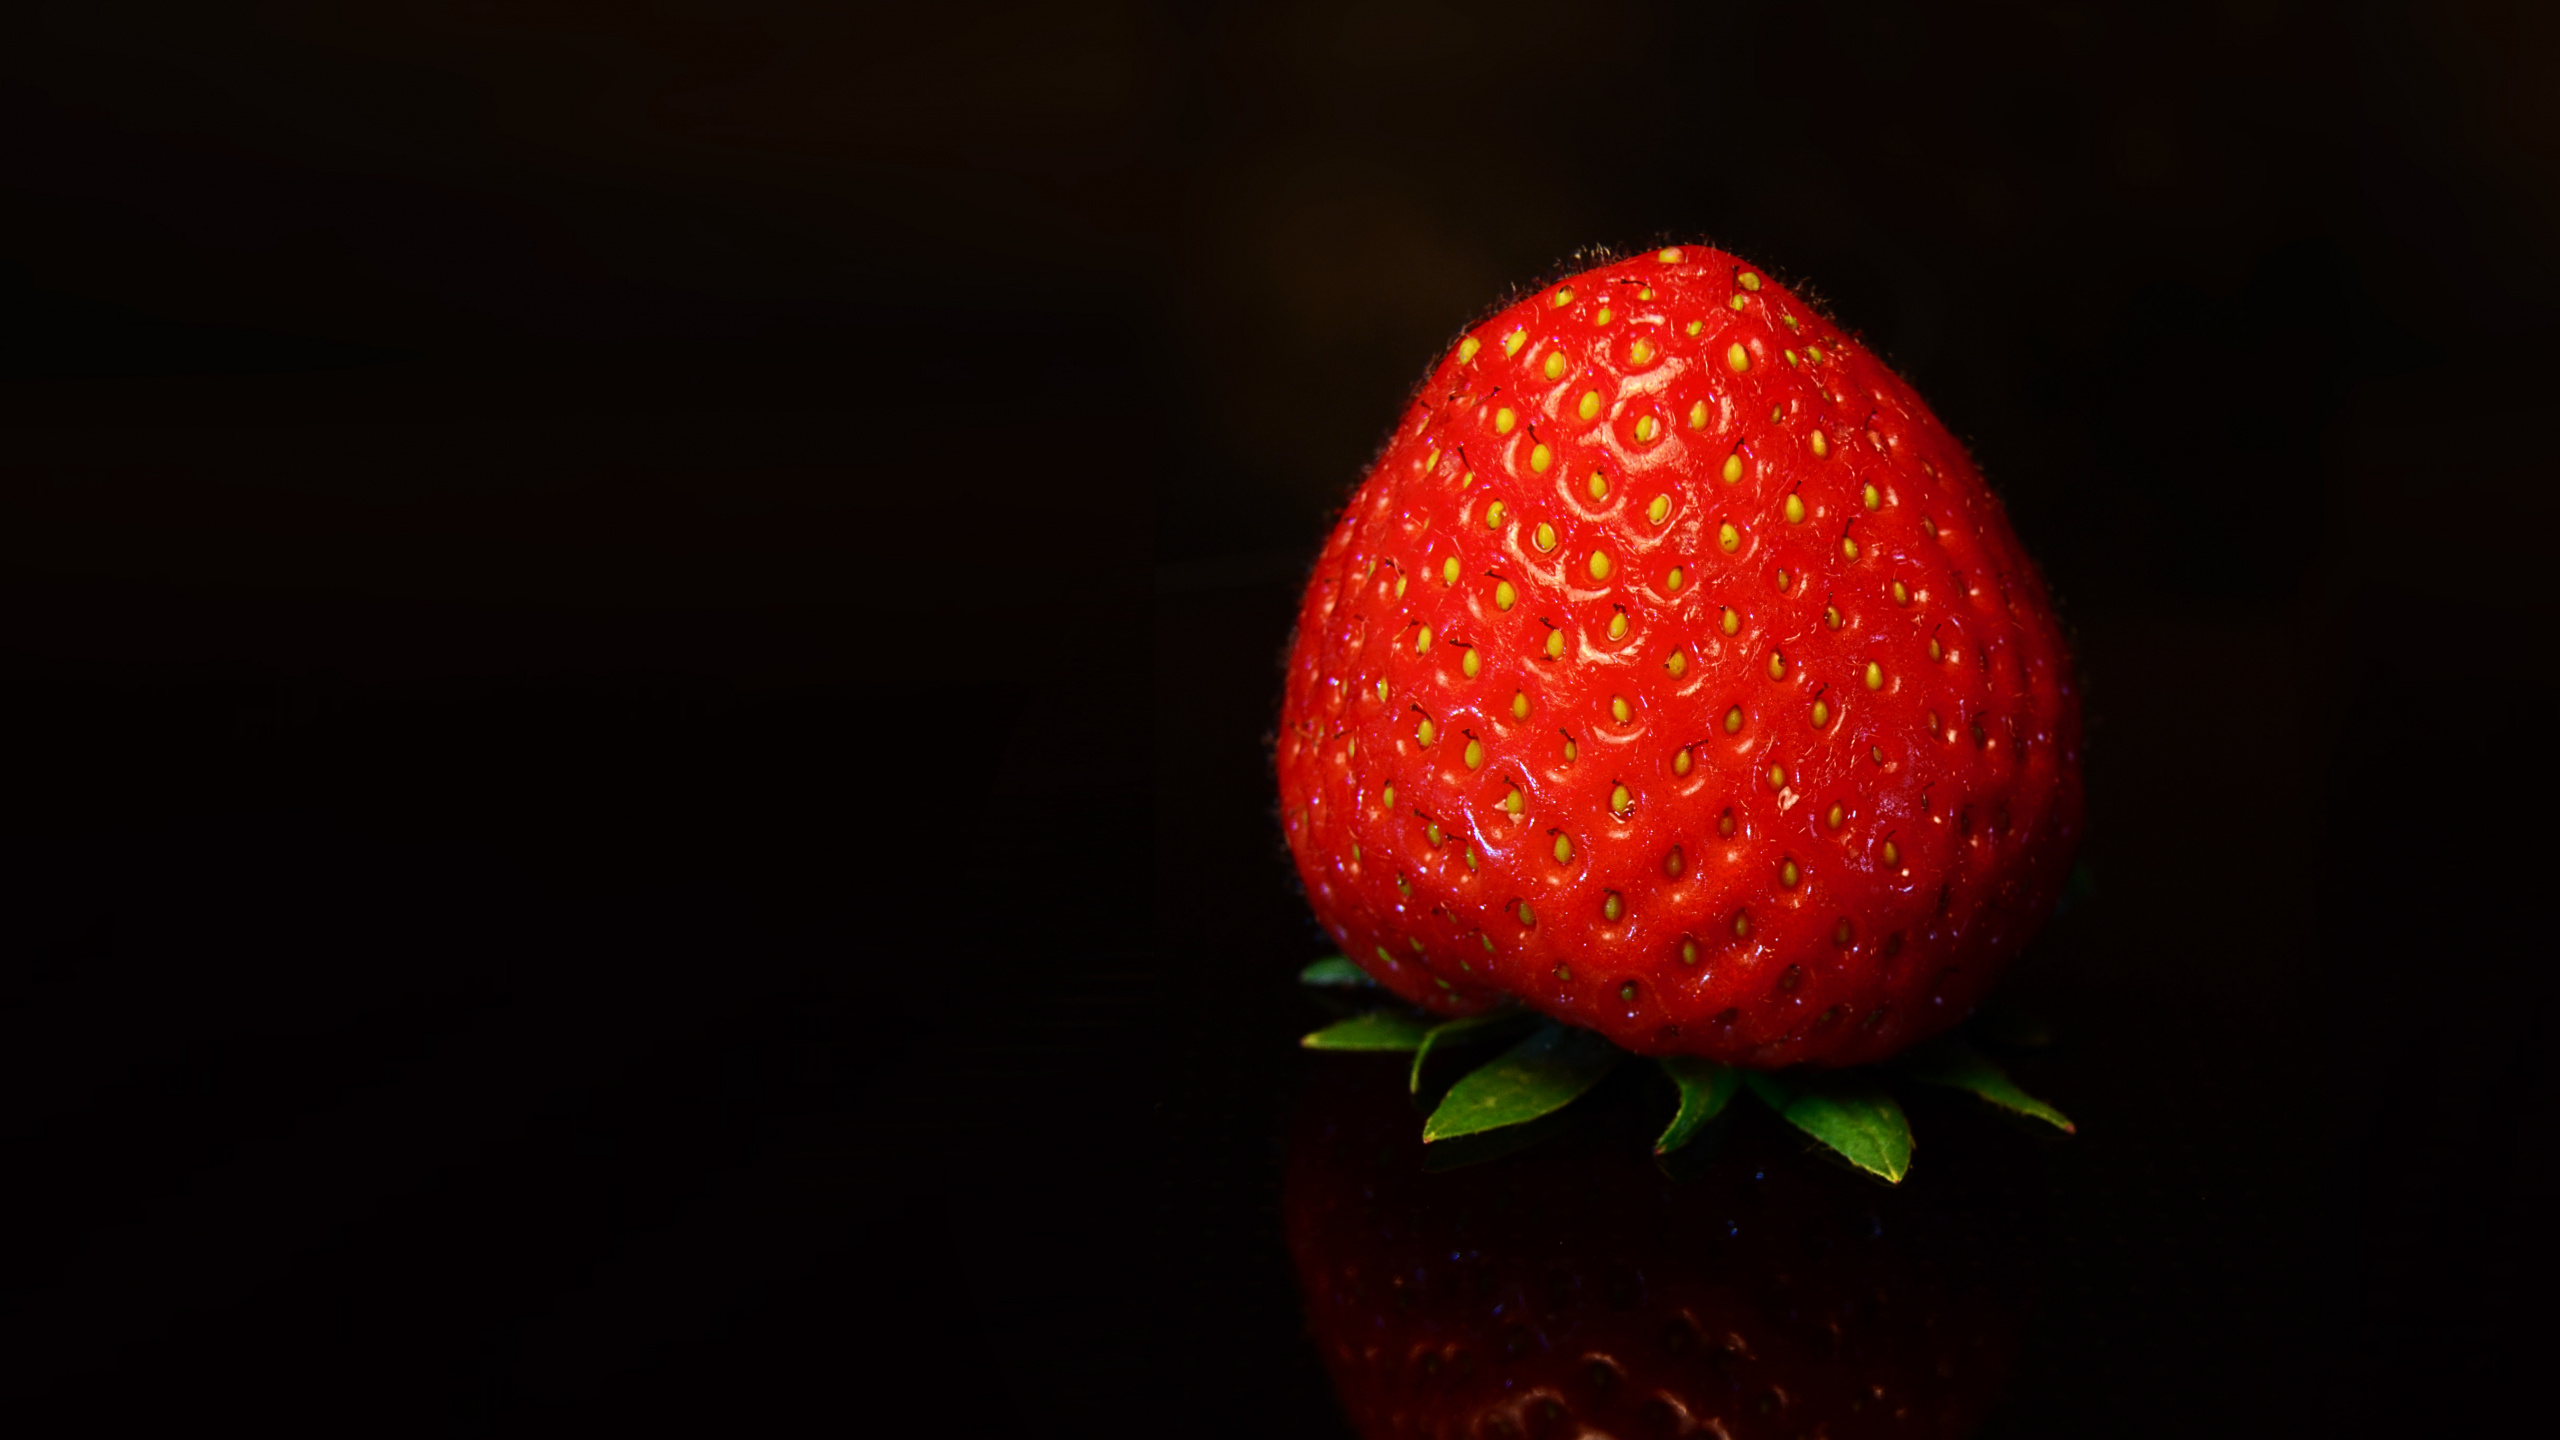 Red Strawberry Fruit in Close up Photography. Wallpaper in 2560x1440 Resolution